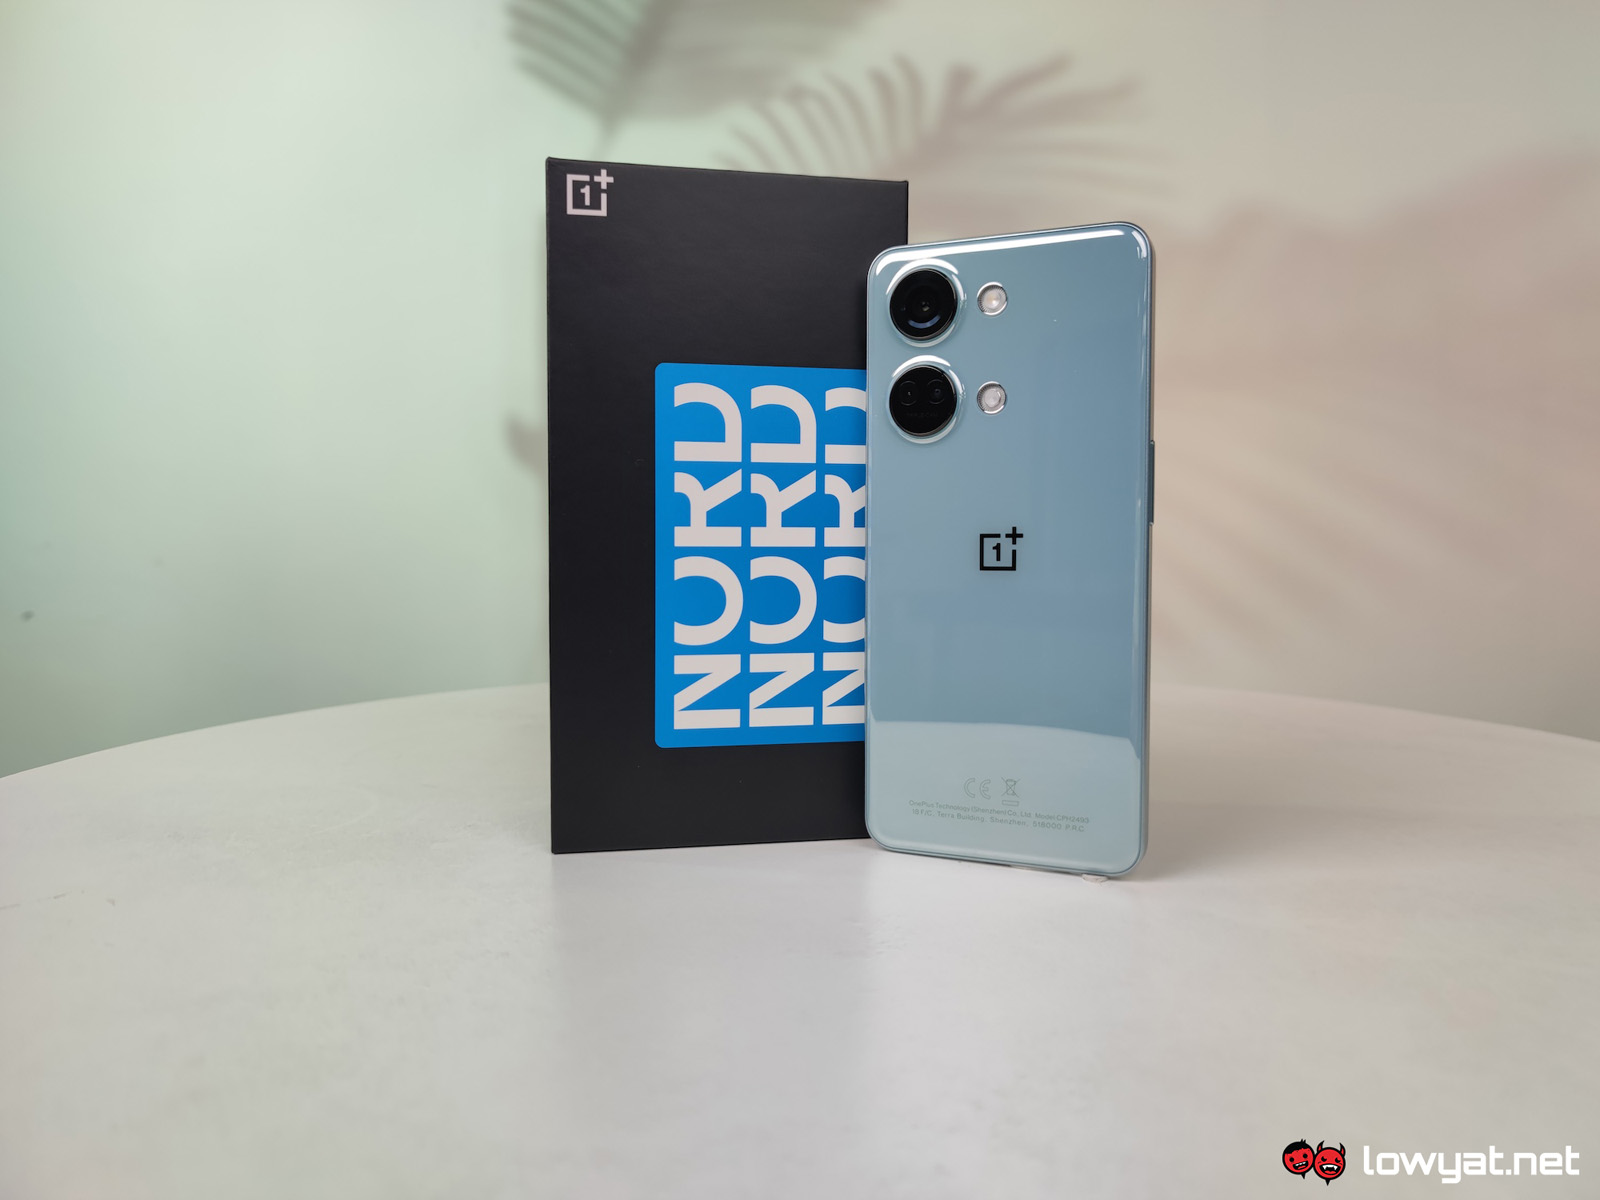 OnePlus Nord 3 5G Review: Playing It Safe 